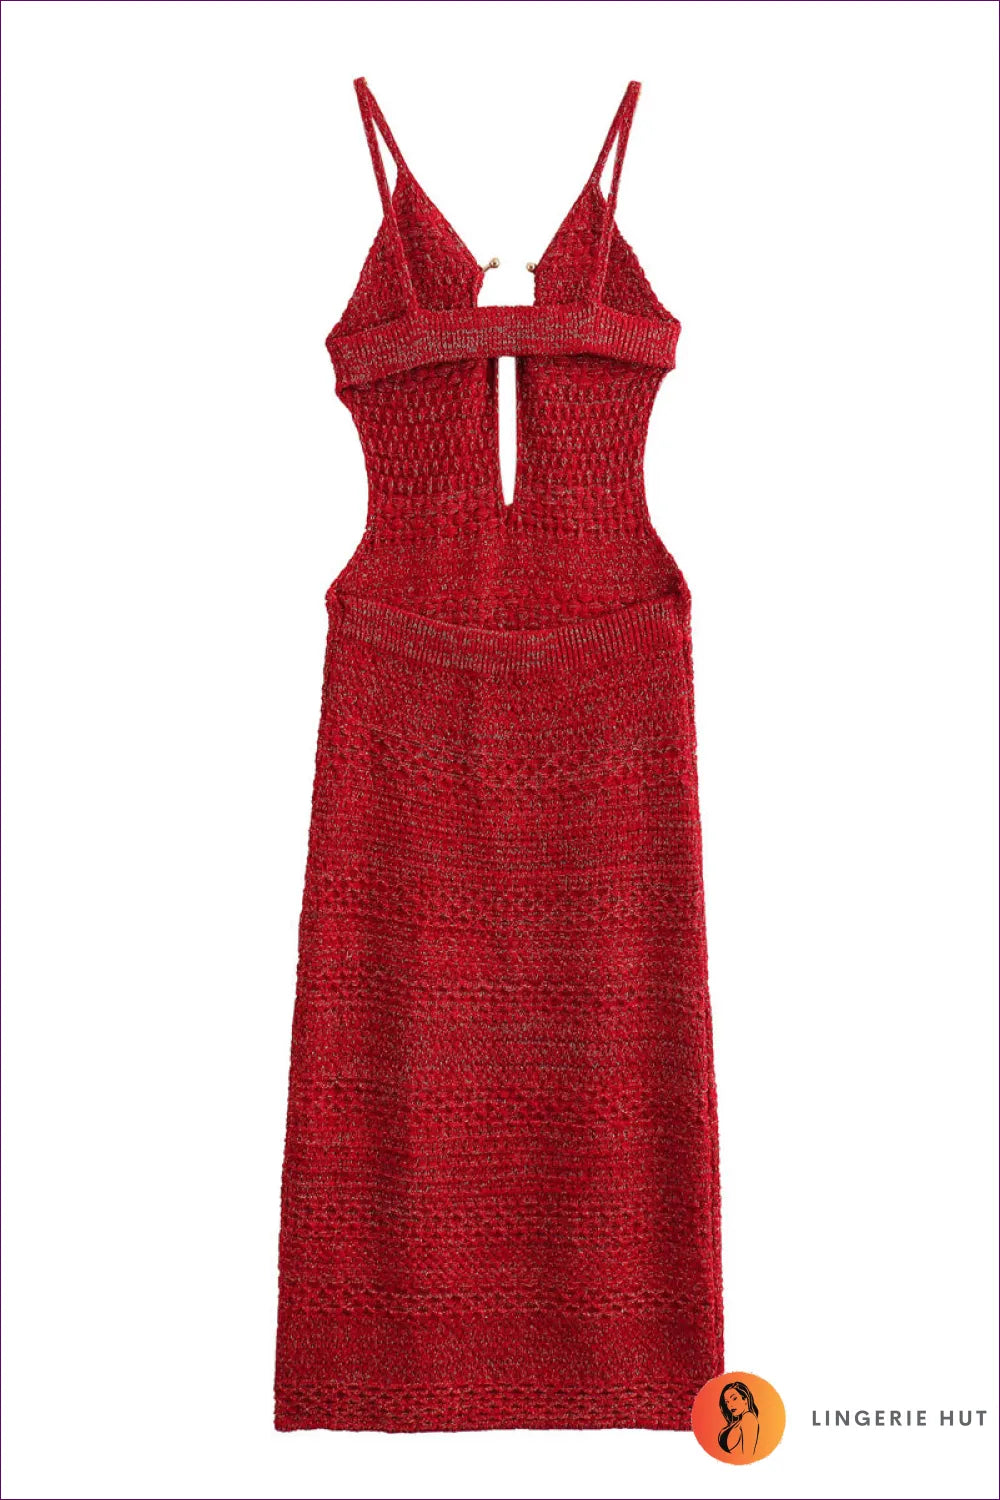 Sensational Red Cut Out Bodycon Dress - Effortlessly Chic